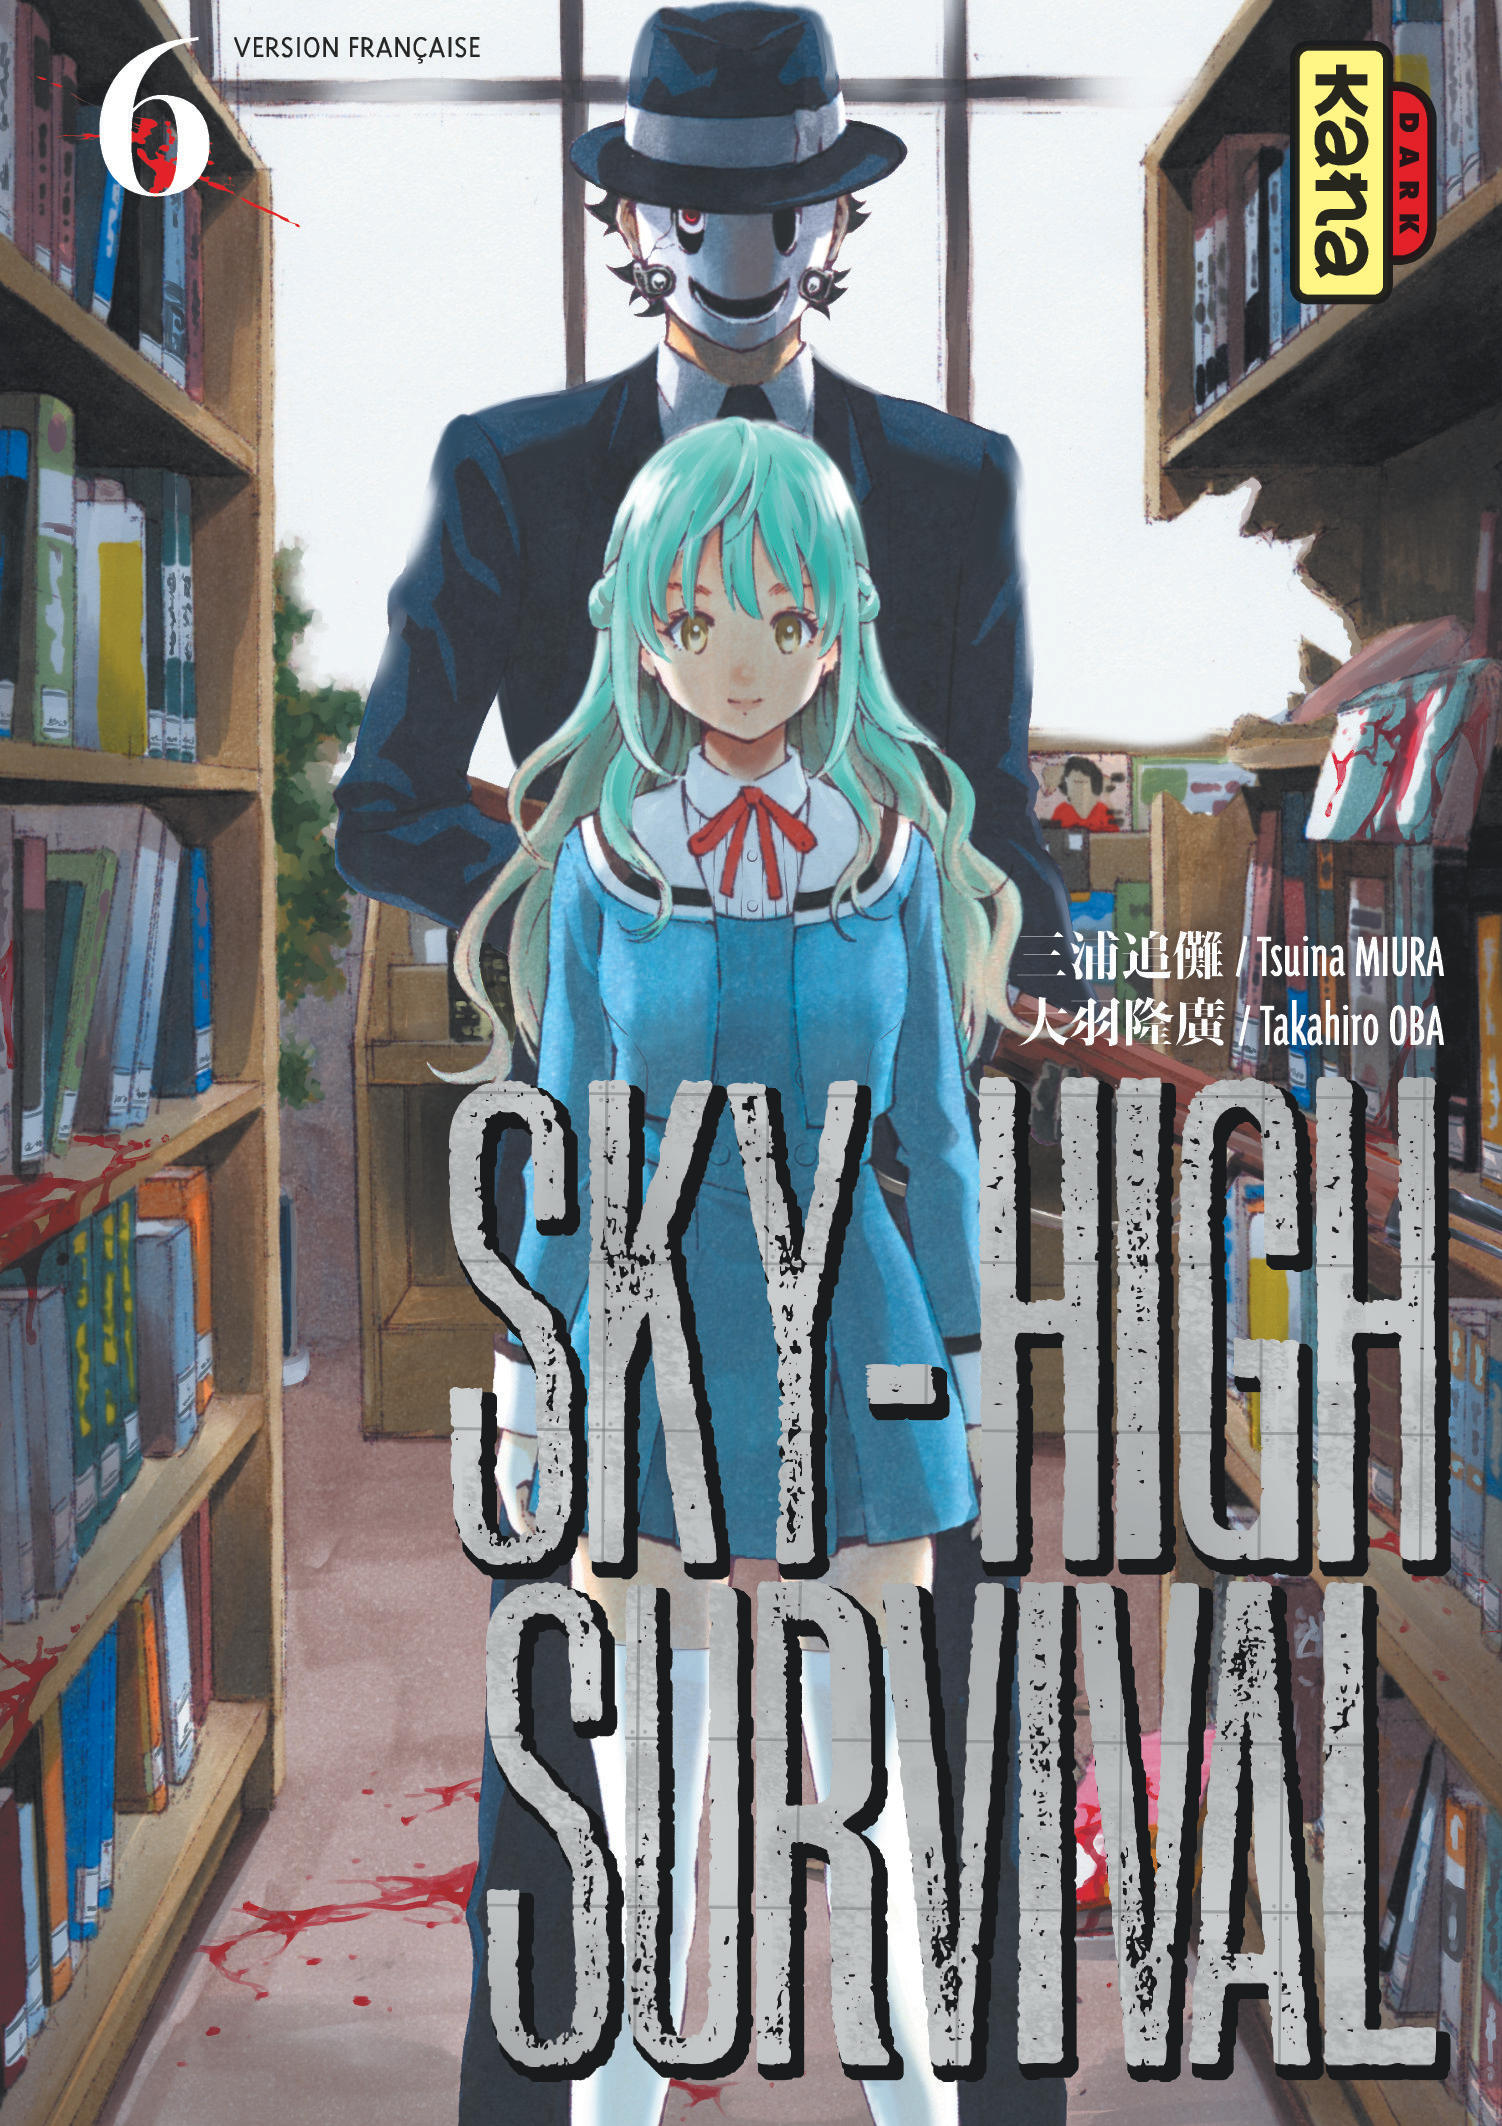 Sky-high survival – Tome 6 - couv